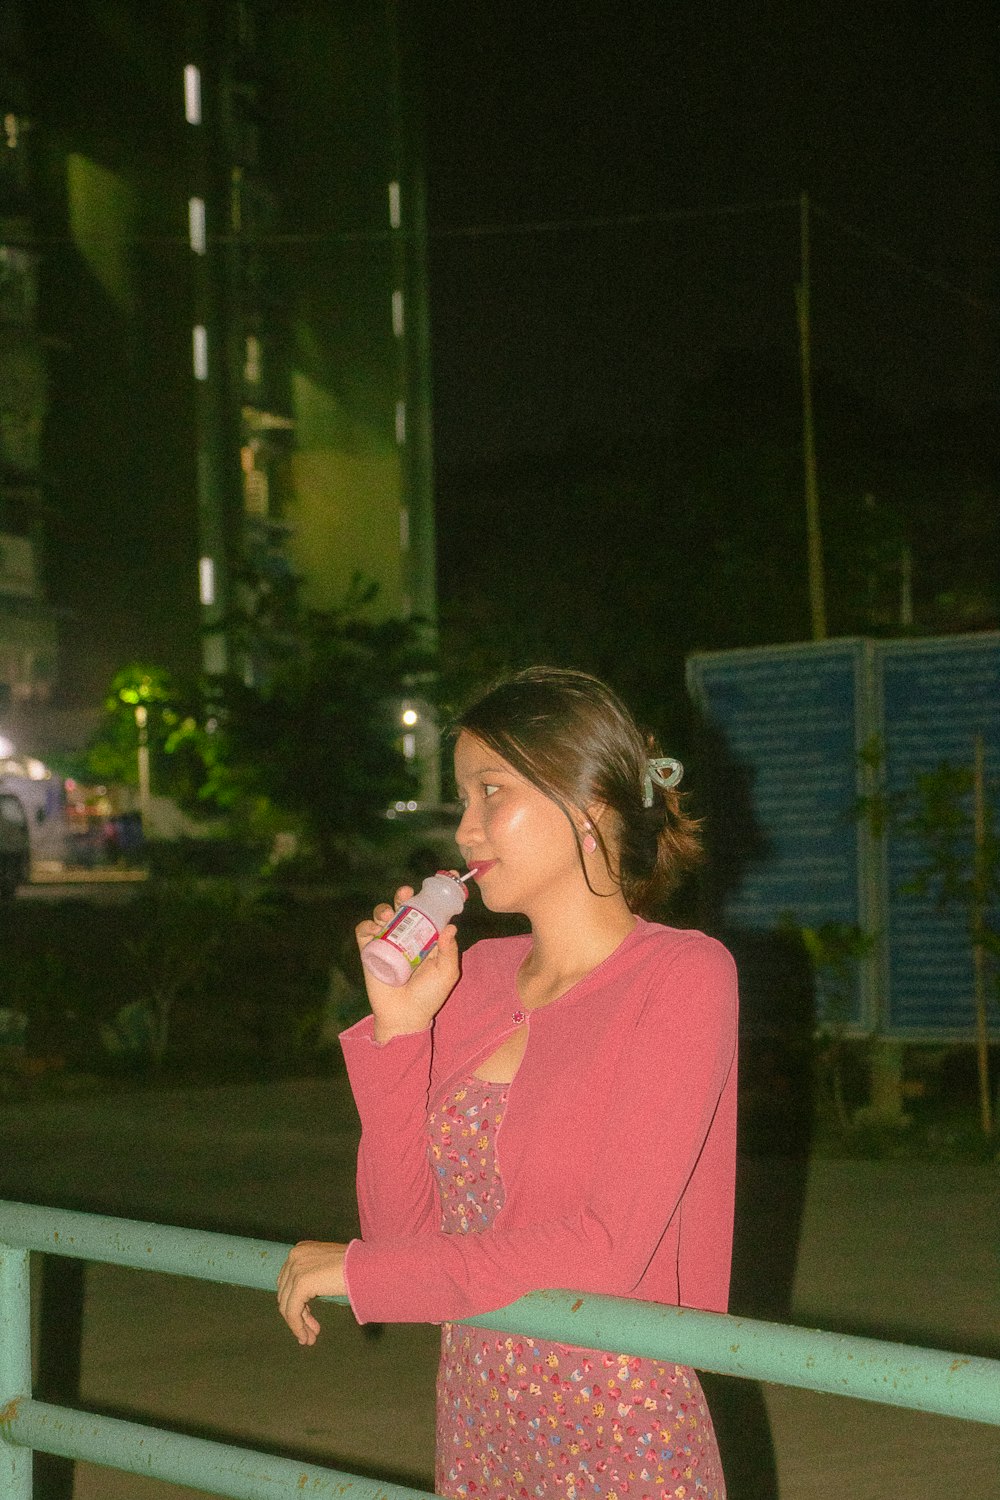 a woman in a pink shirt is drinking from a bottle